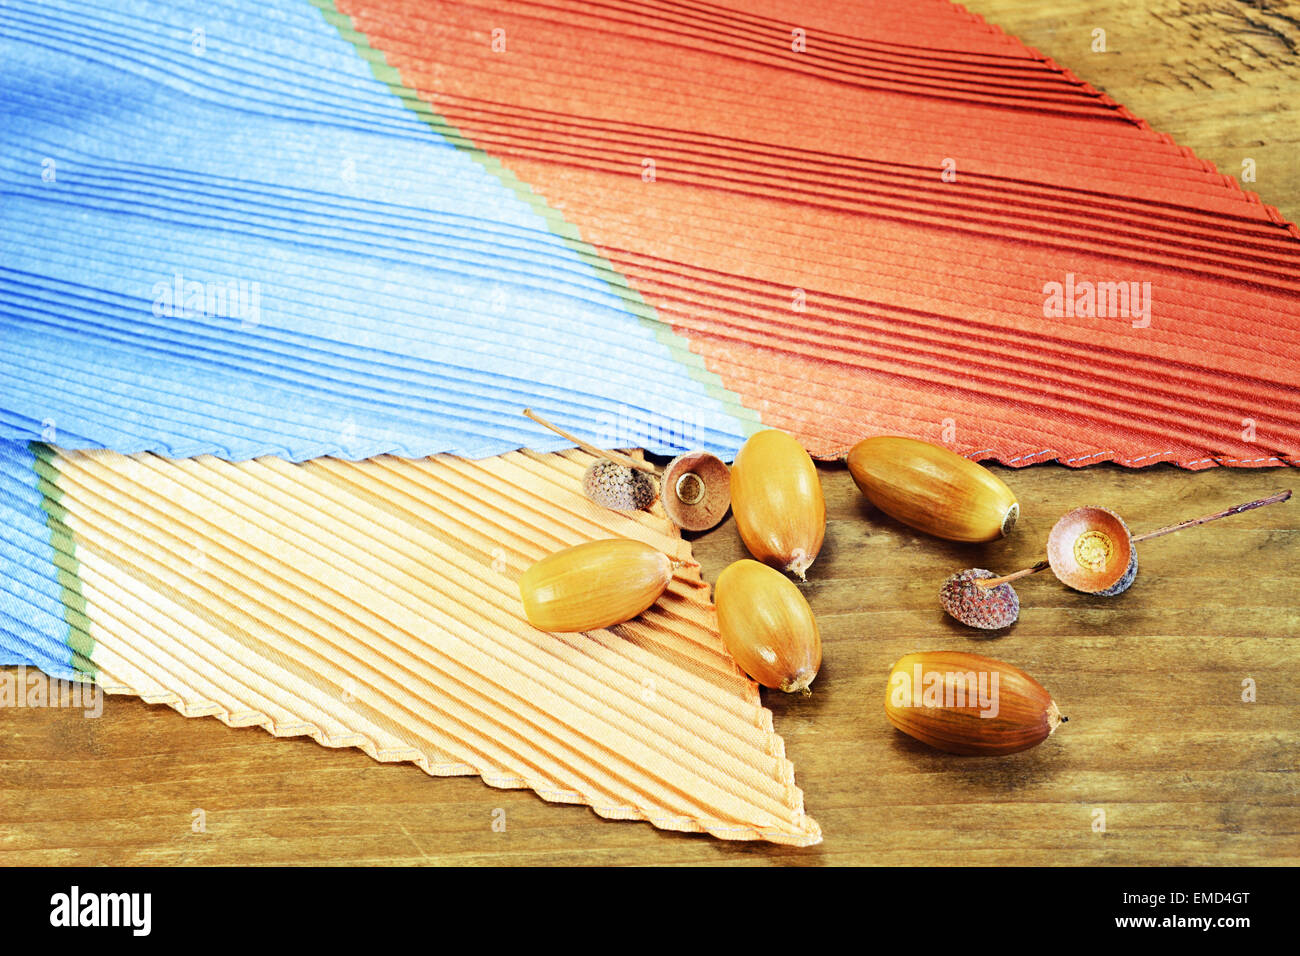 Pleated silk scarf and acorns on wooden surface Stock Photo